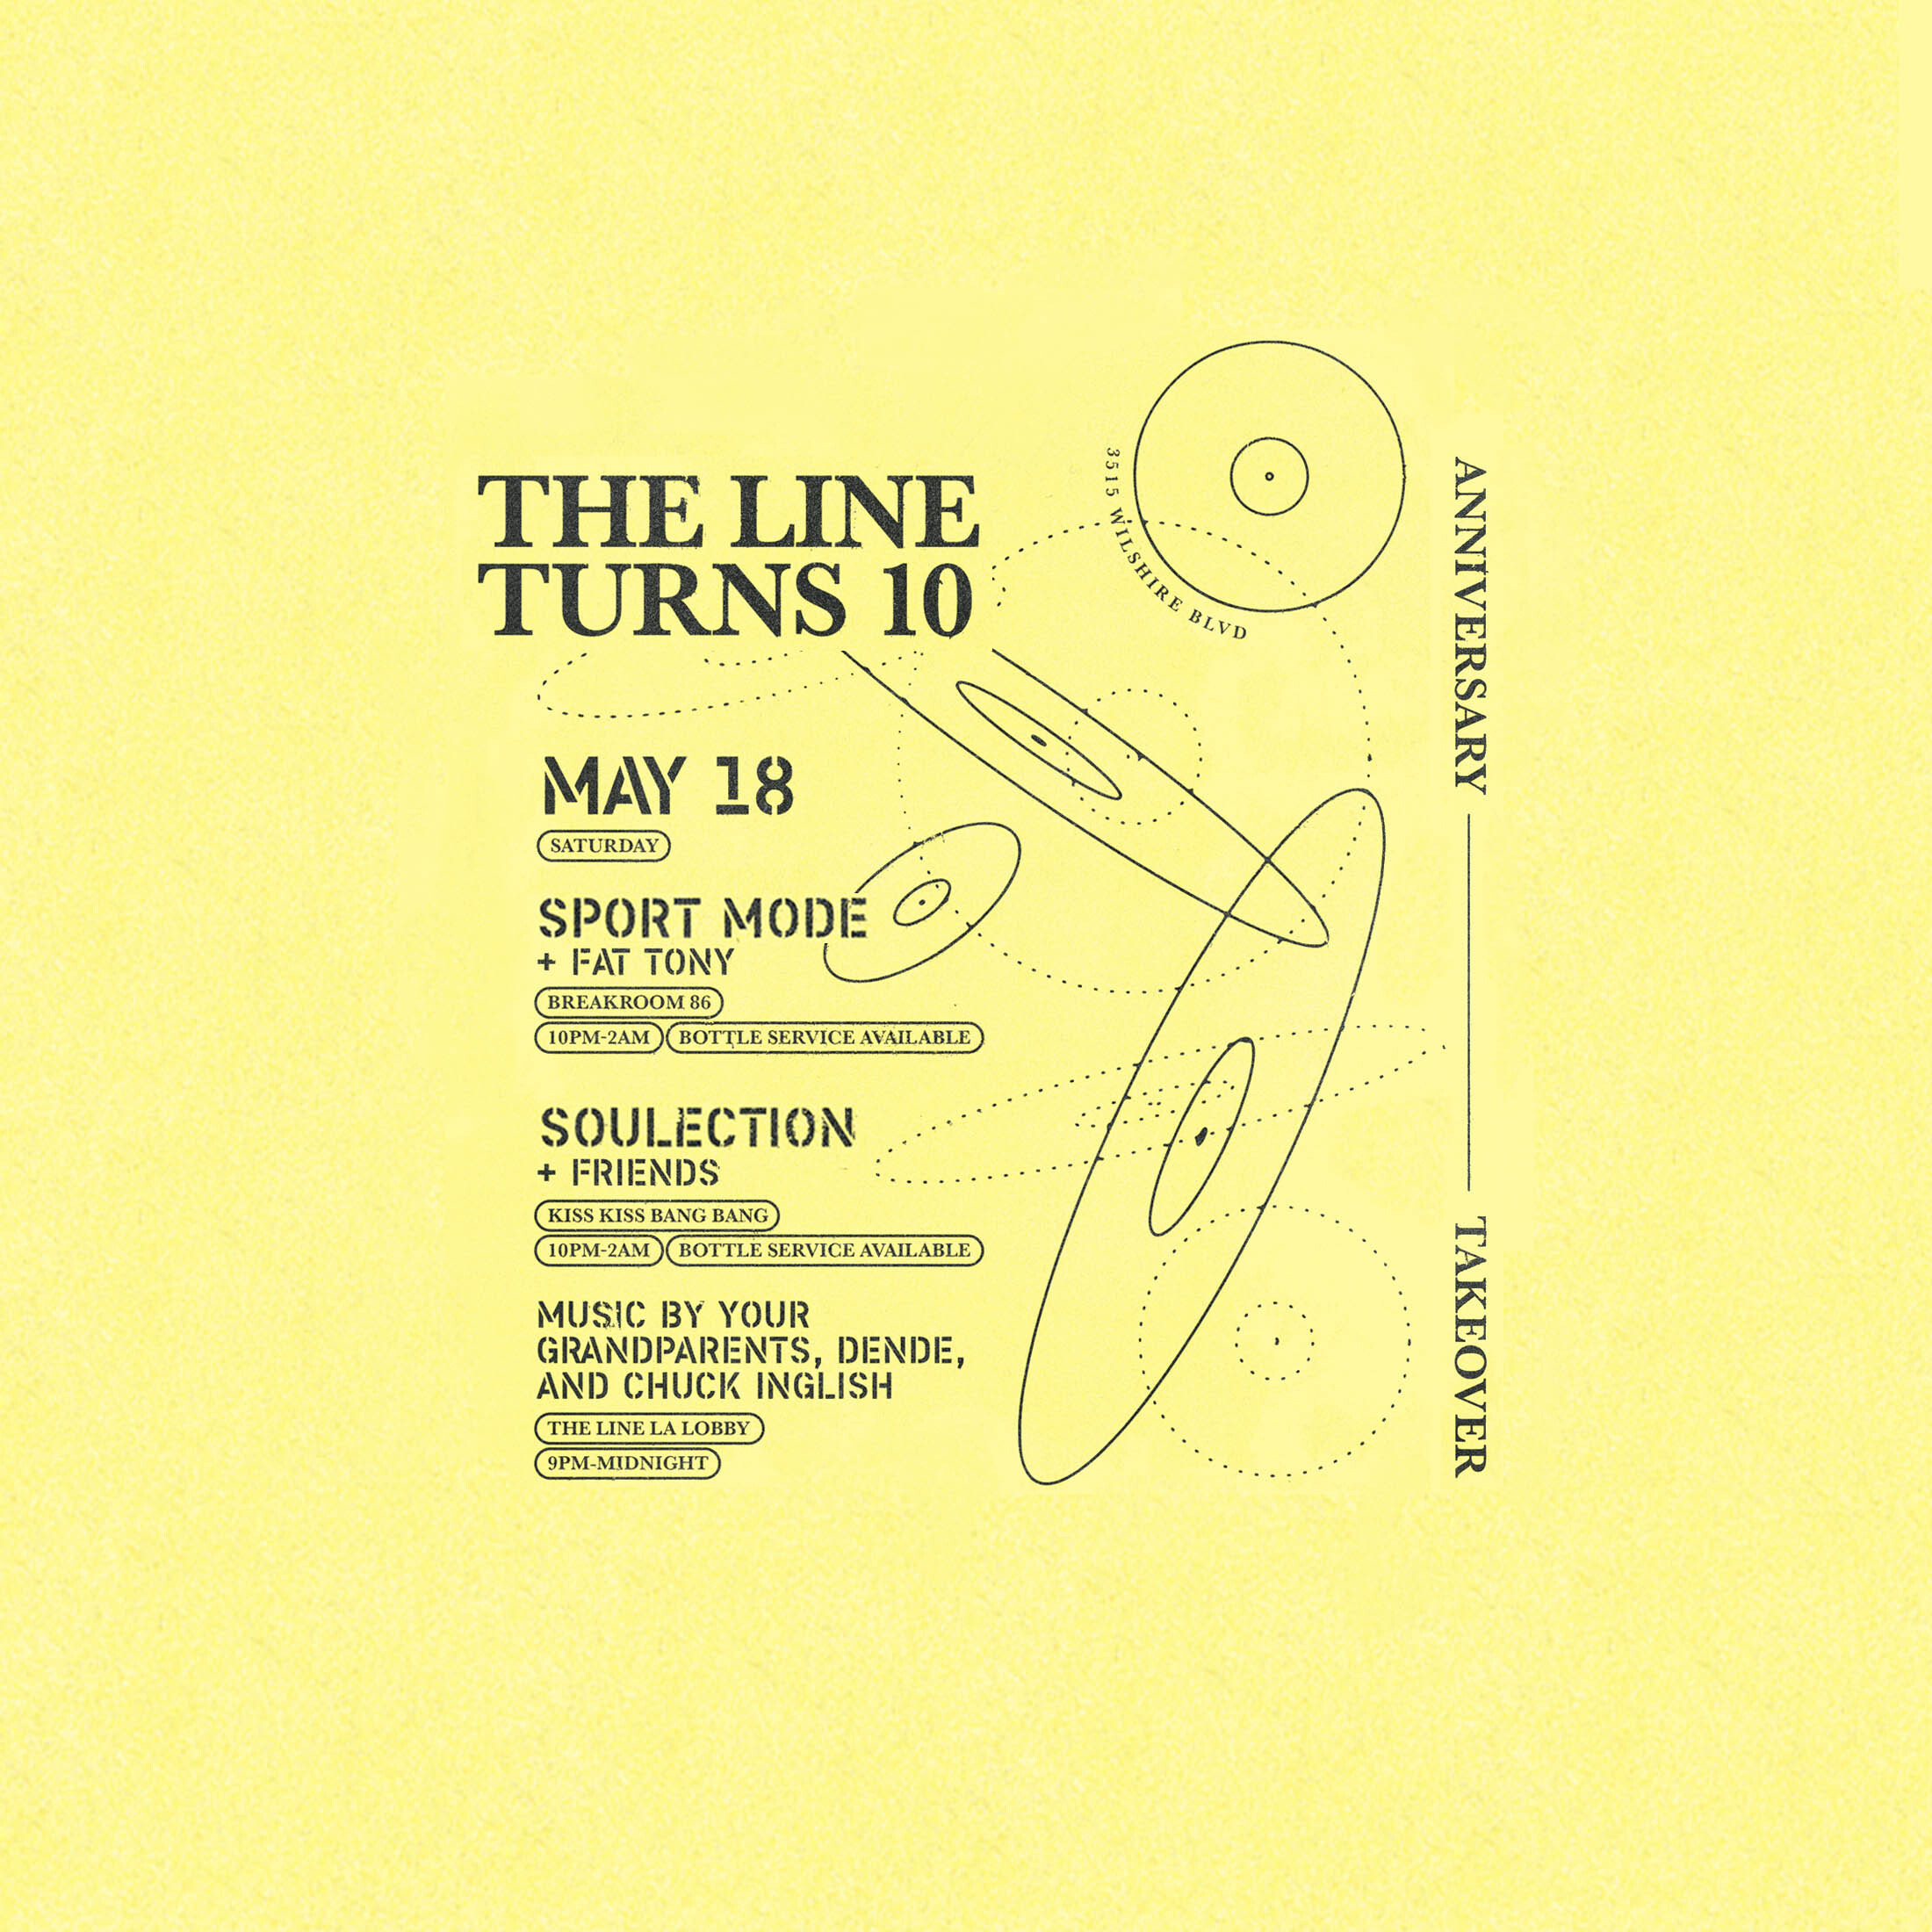 A poster to The LINE Turns 10 on May 18th at the LINE LA.